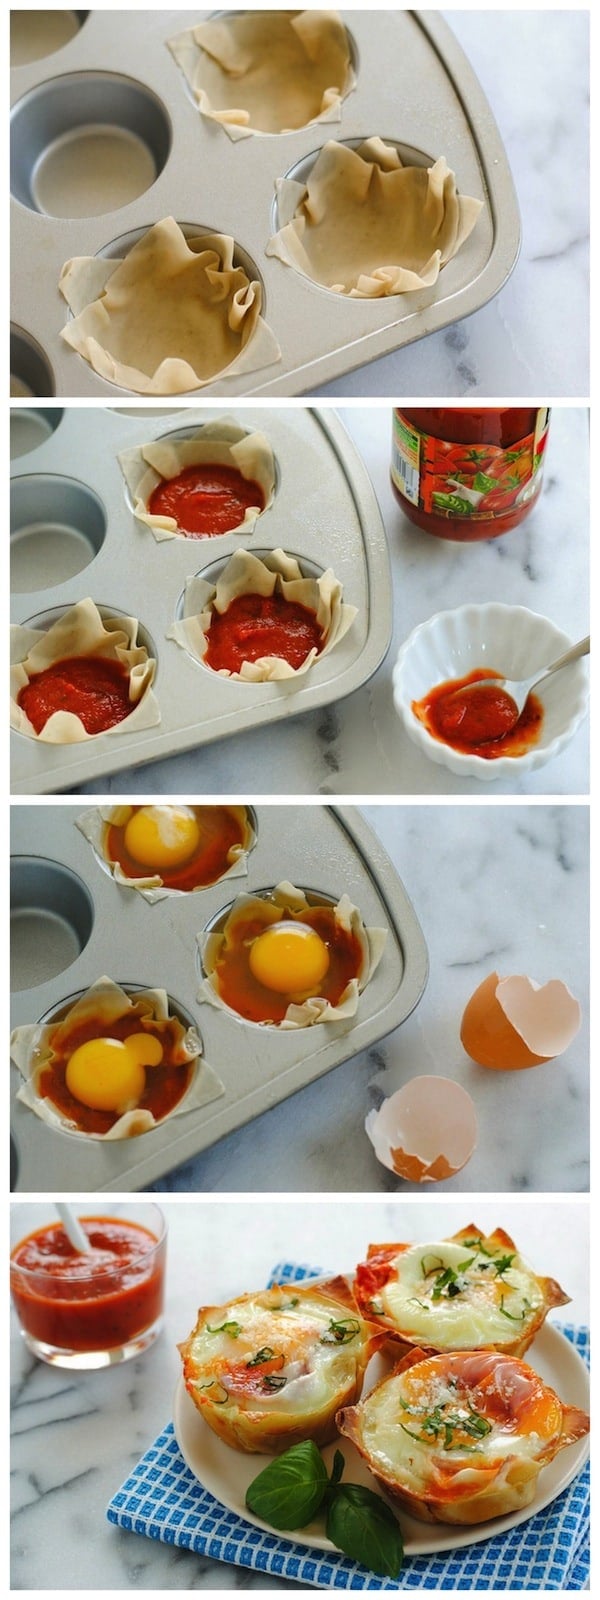 Italian Egg Wonton Cups - A cute, delicious way to serve eggs to a crowd at brunch! Crispy wonton cups filled with marinara sauce and eggs, topped with Parmesan cheese and basil. | foxeslovelemons.com